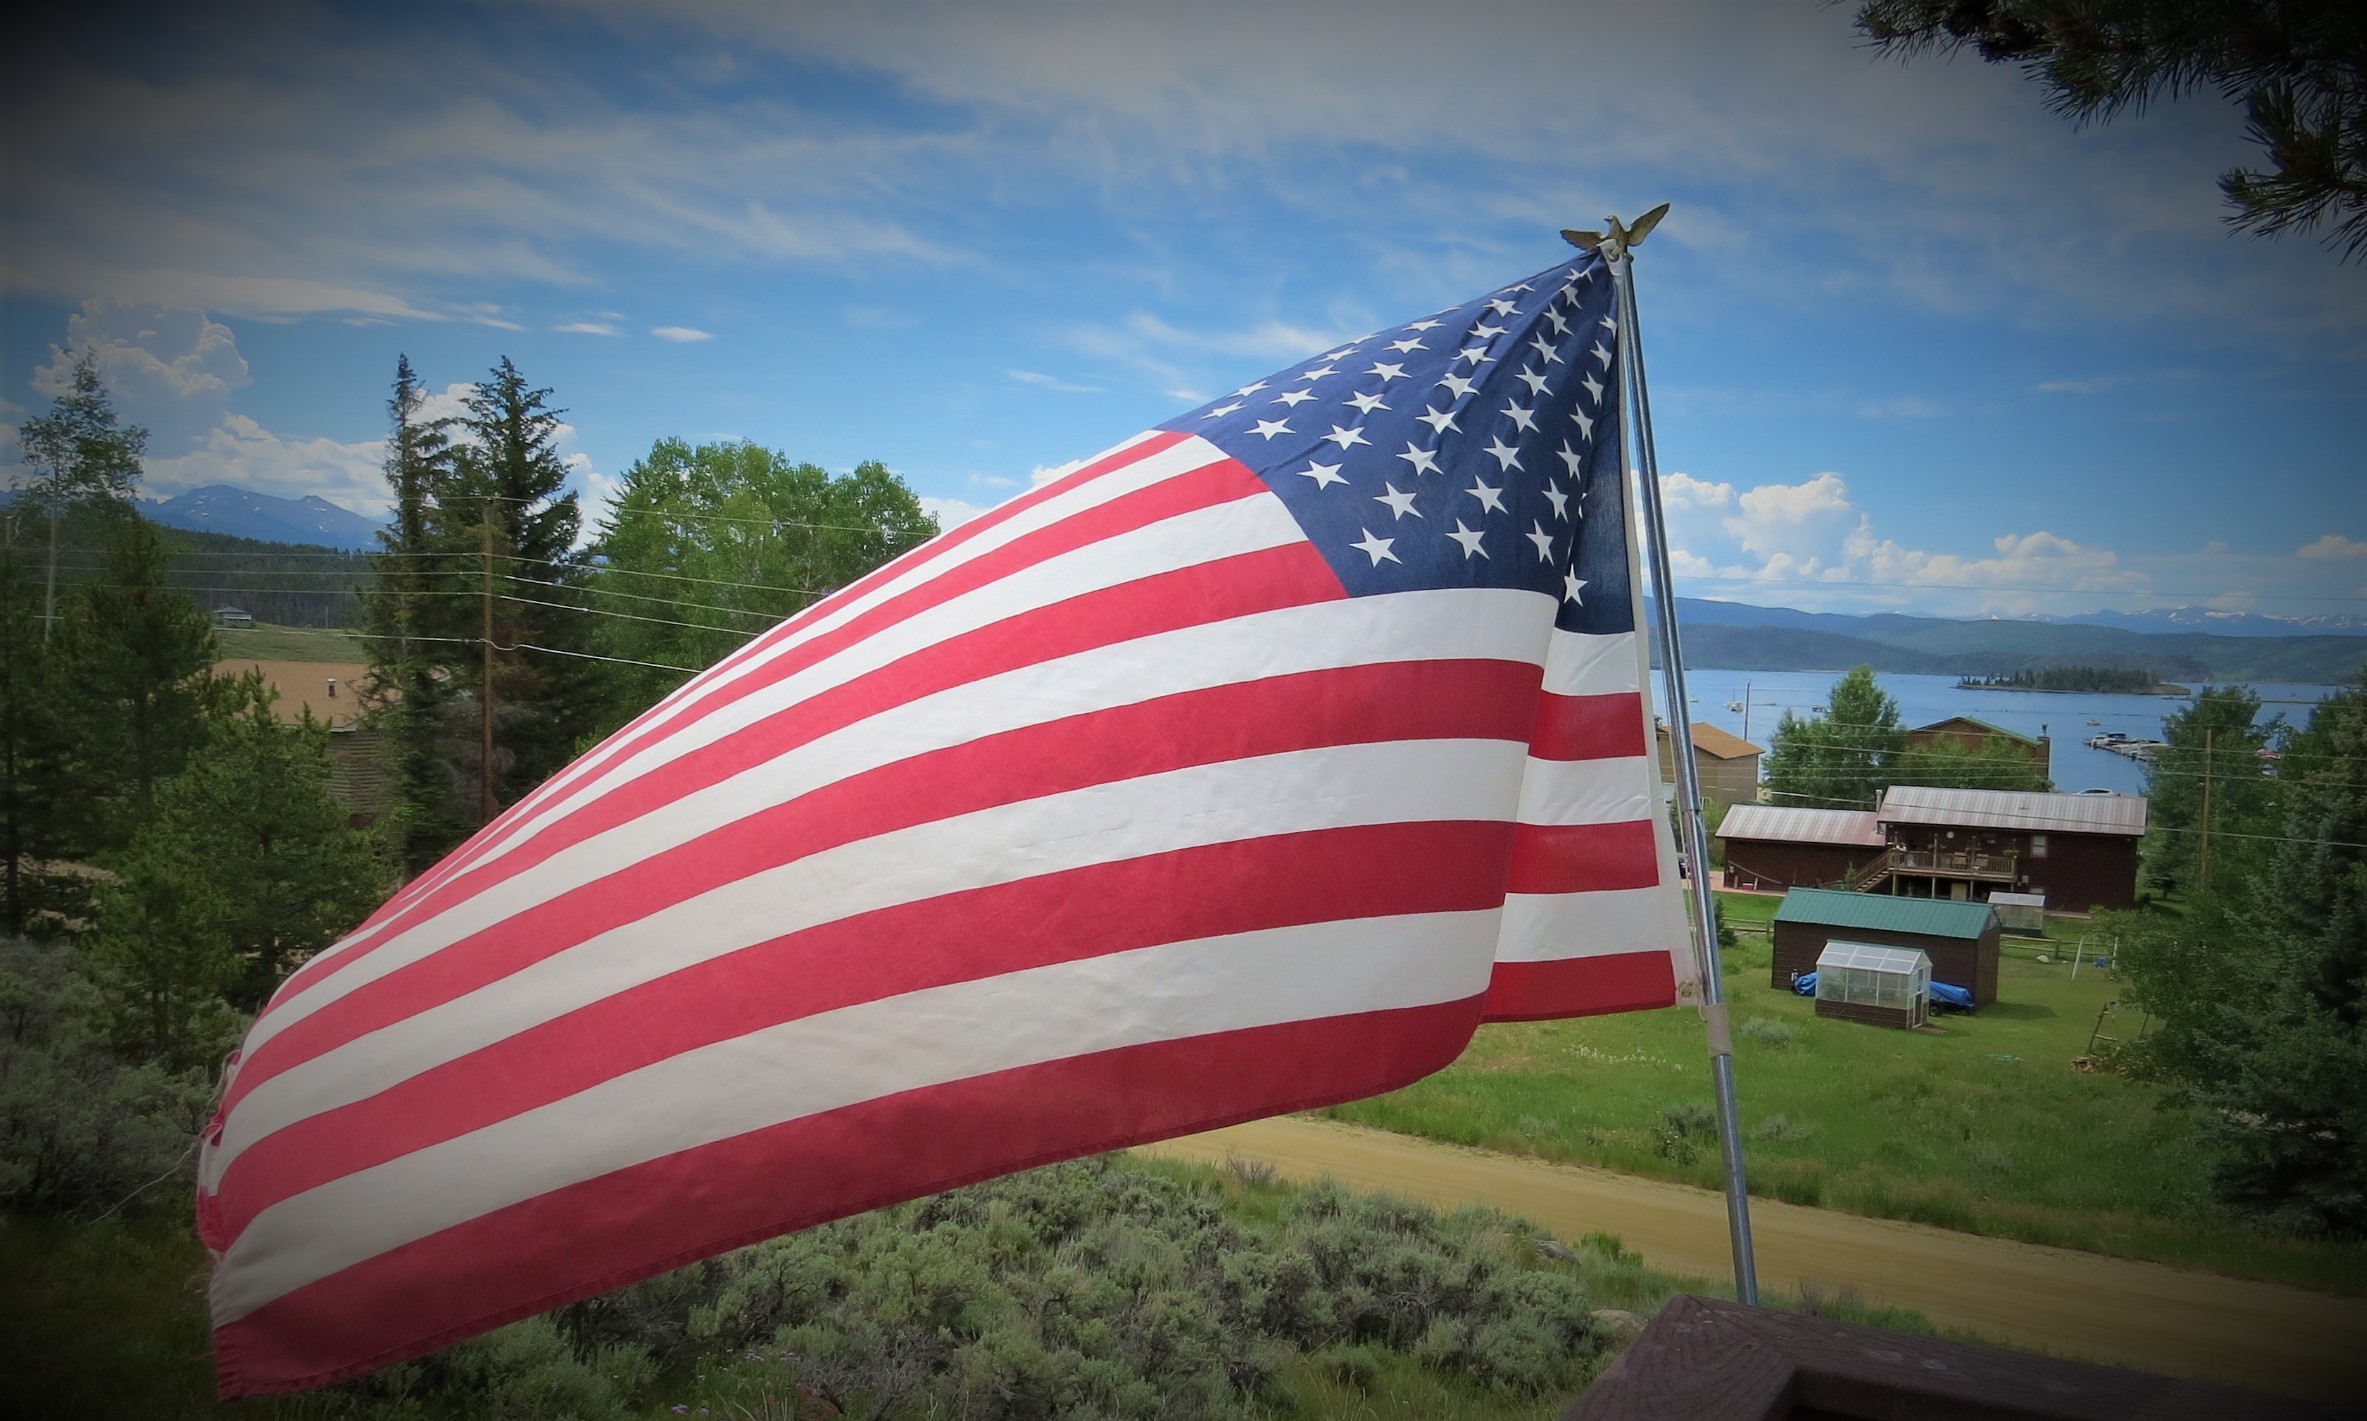 U.S. Flag waving in the breeze with mountain and lake scenic background on the Fourth of July during the COVID-19 pandemic. The accompanying article discusses the idea of potential in healing after trauma, in this case a shared, collective trauma.